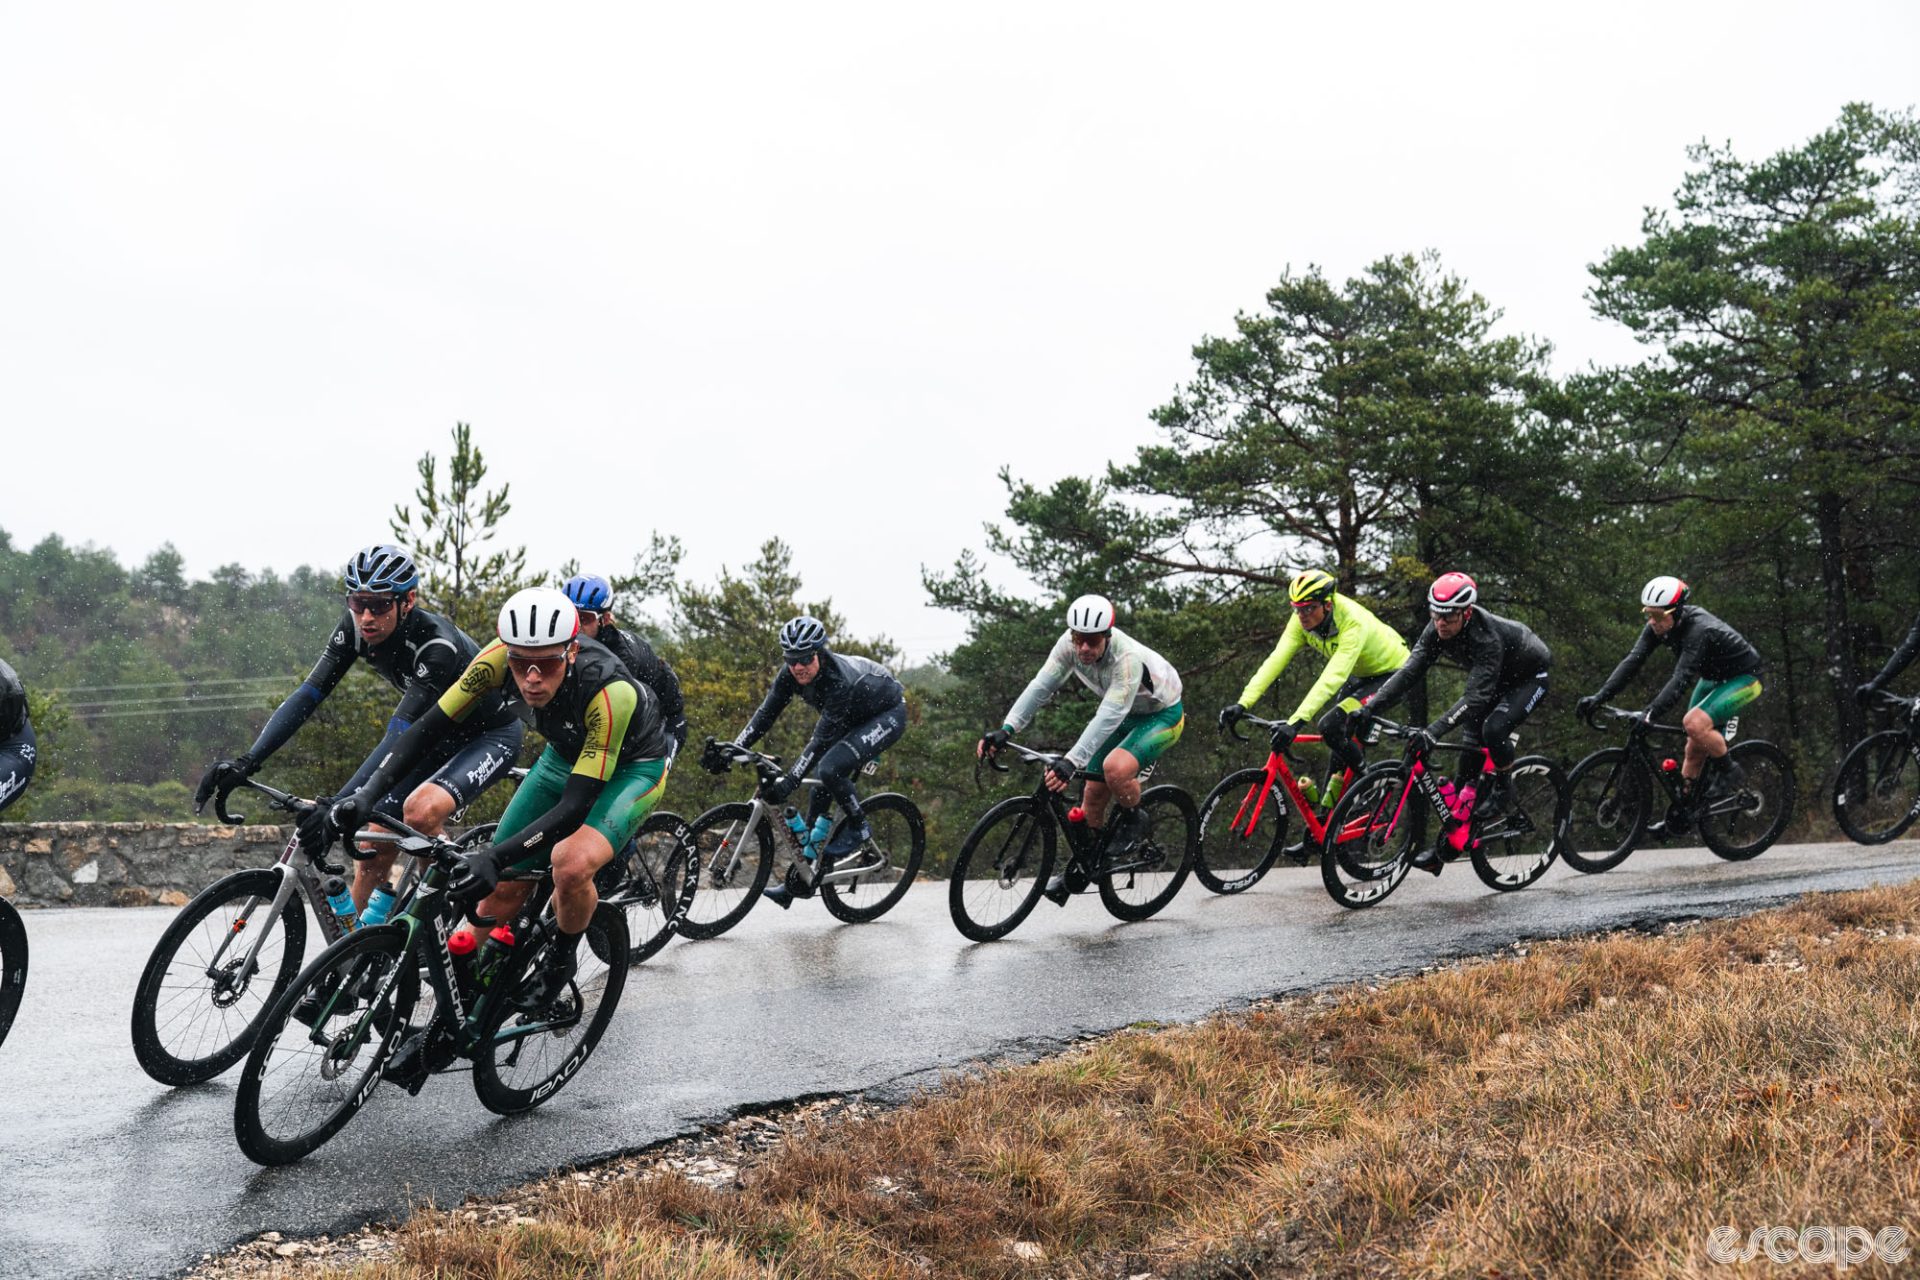 Riders carefully navigate a corner on a descent in Tour de la Provence. The road is wet, the sky a flat gray, and everyone looks cold and unhappy.